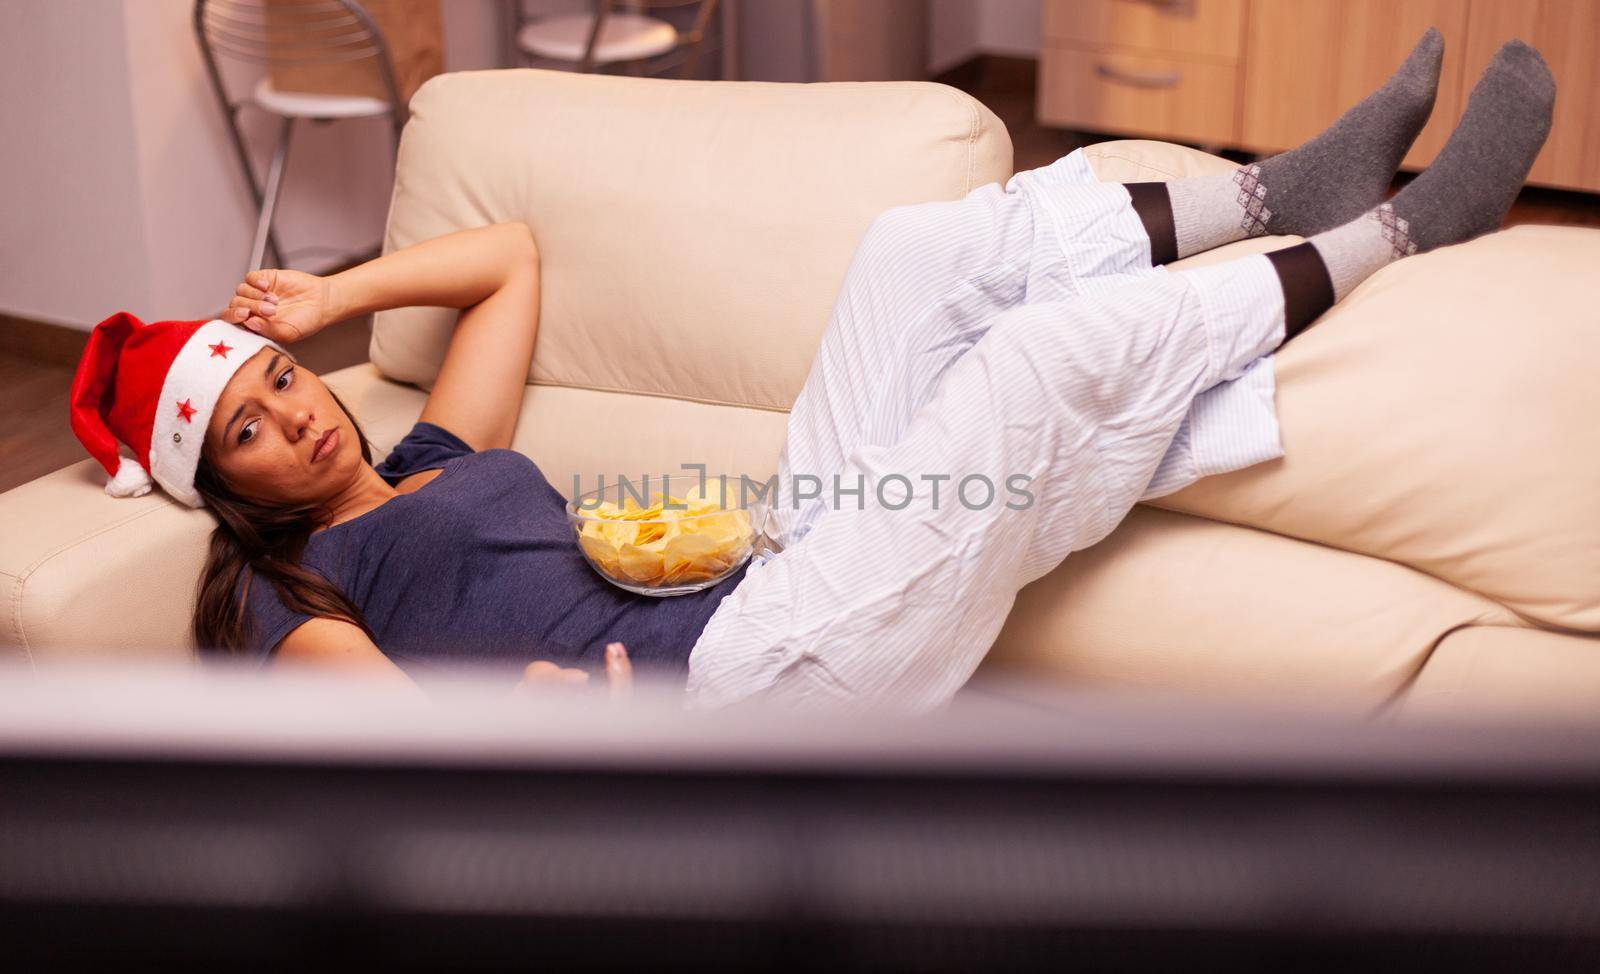 Relaxed girl lying on sofa watching christmas movie series on television celebrating christmastime in x-mas decorated kitchen. Woman wearing santa hat enjoying winter season at home